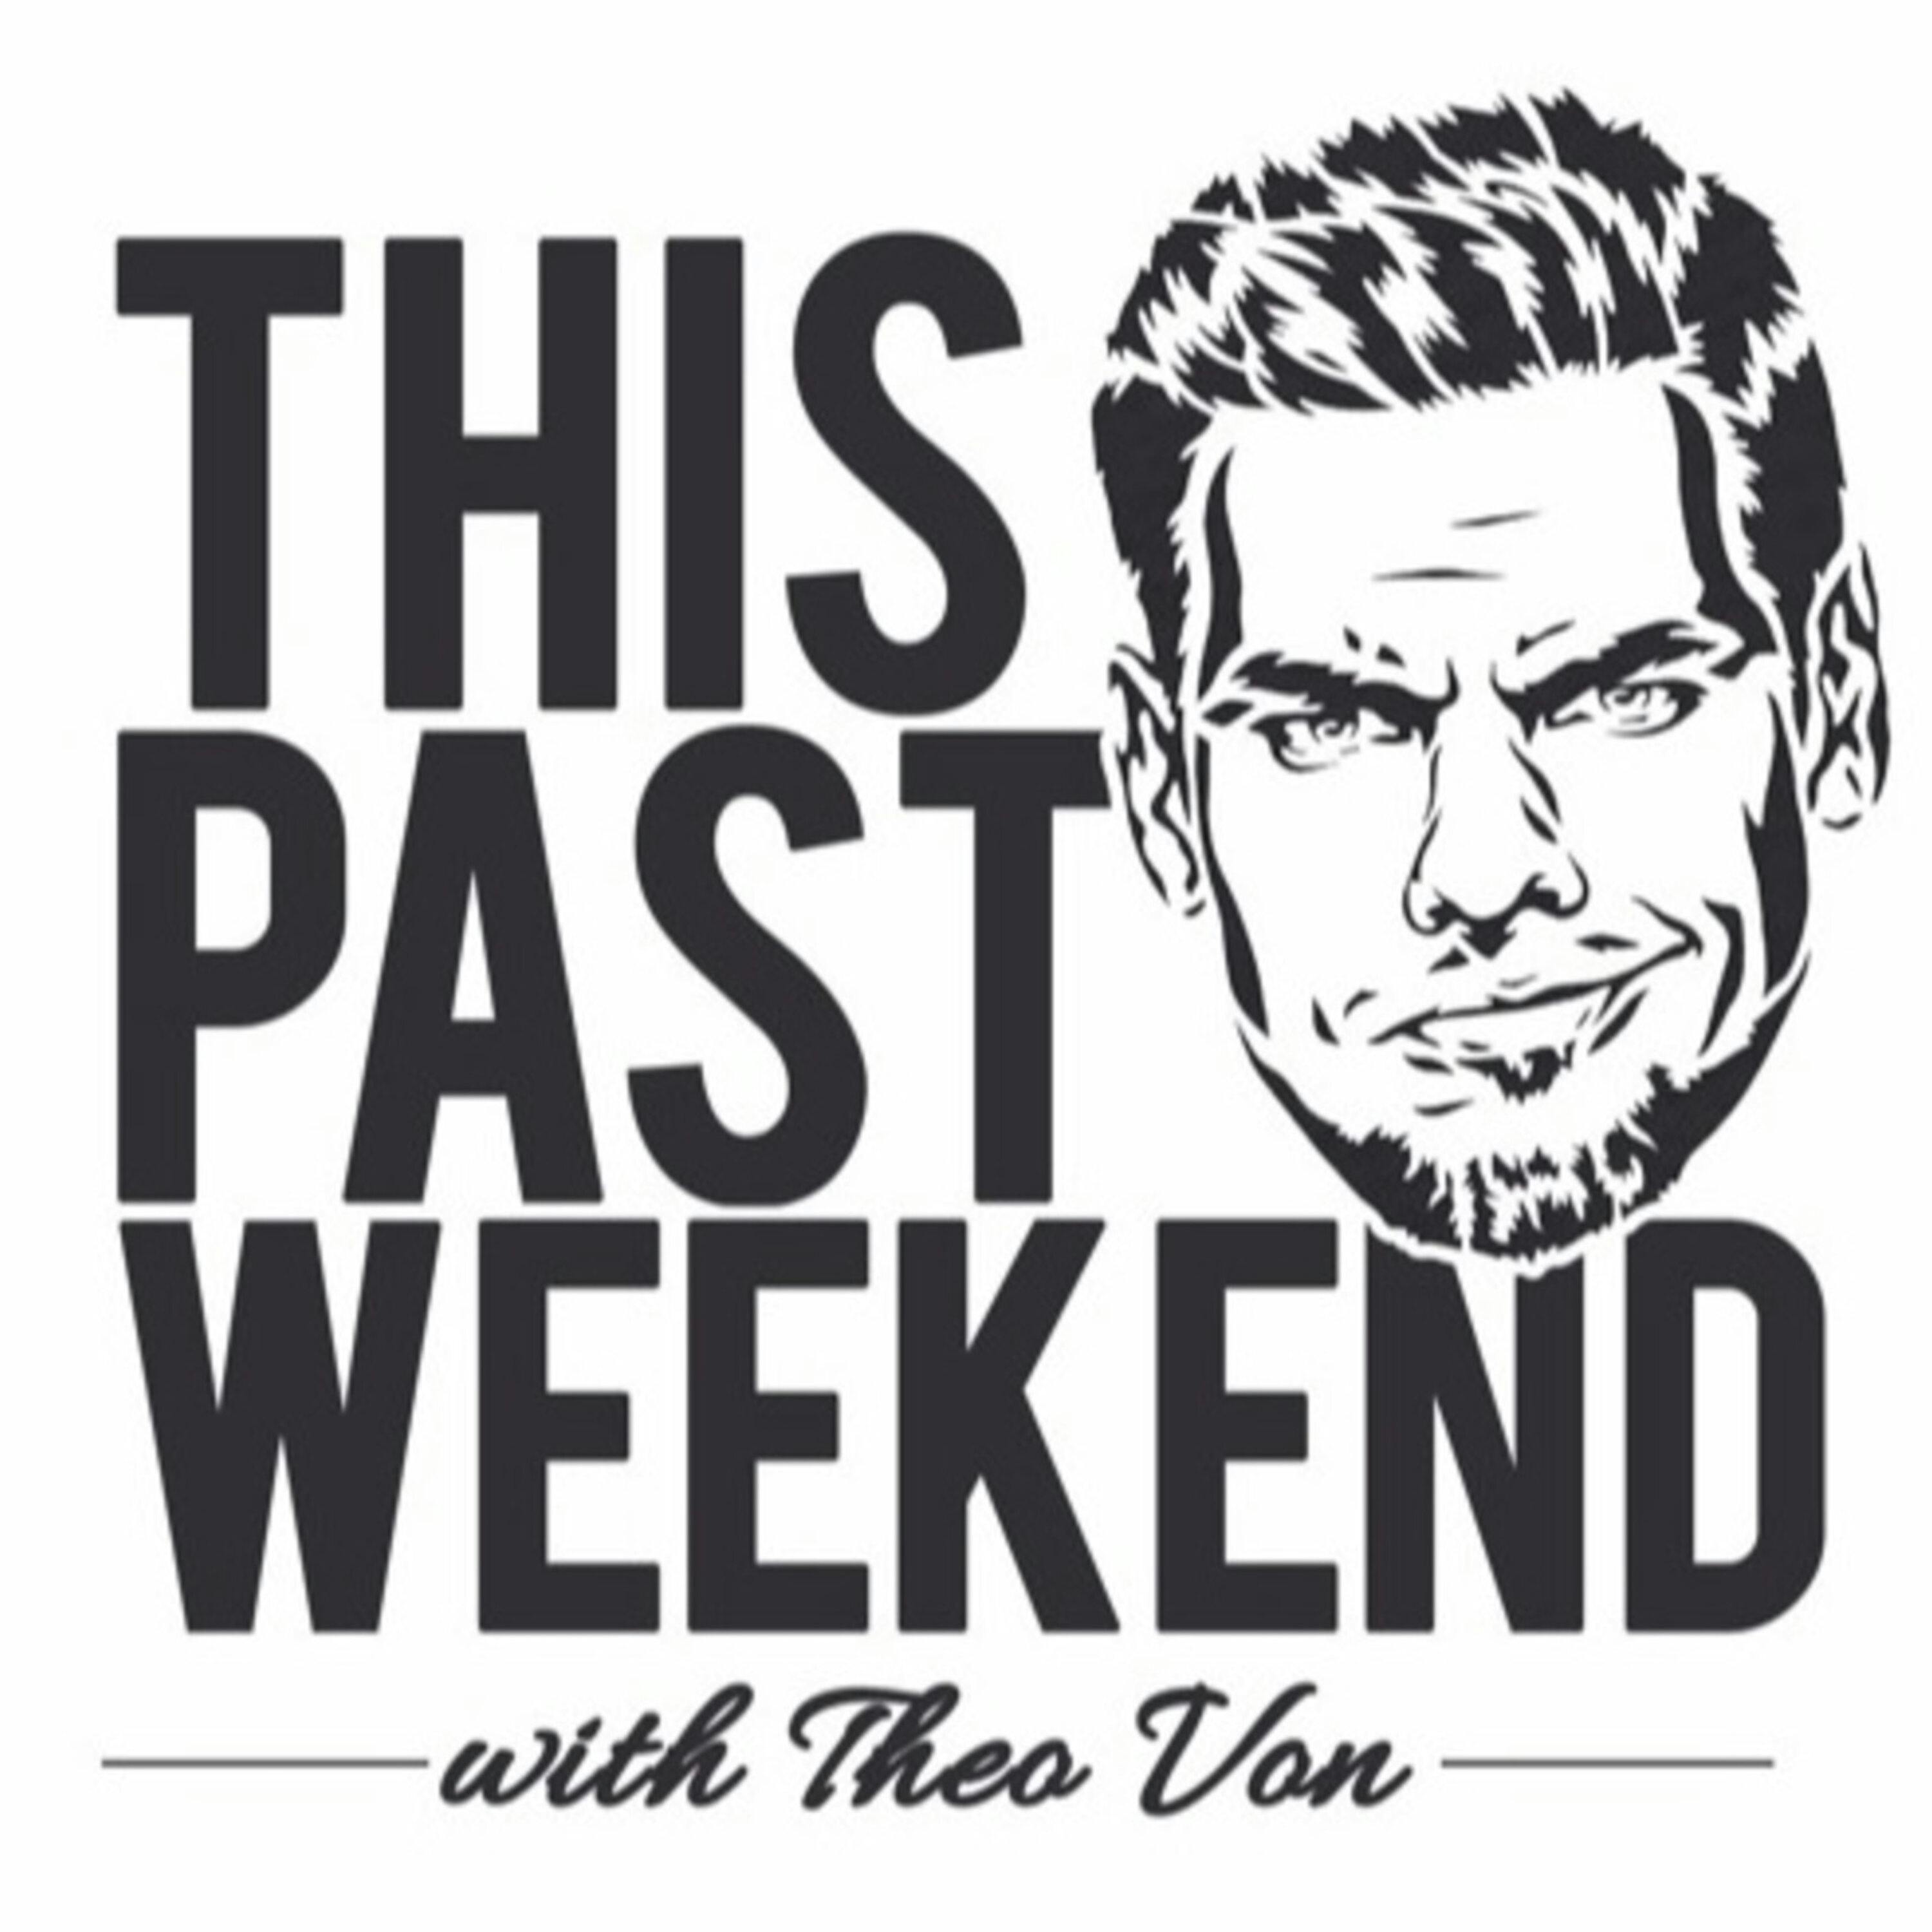 7-17-17: Disneyworld, Nationalism, Infidelity, & Cat recipes | This Past Weekend #33 by Theo Von